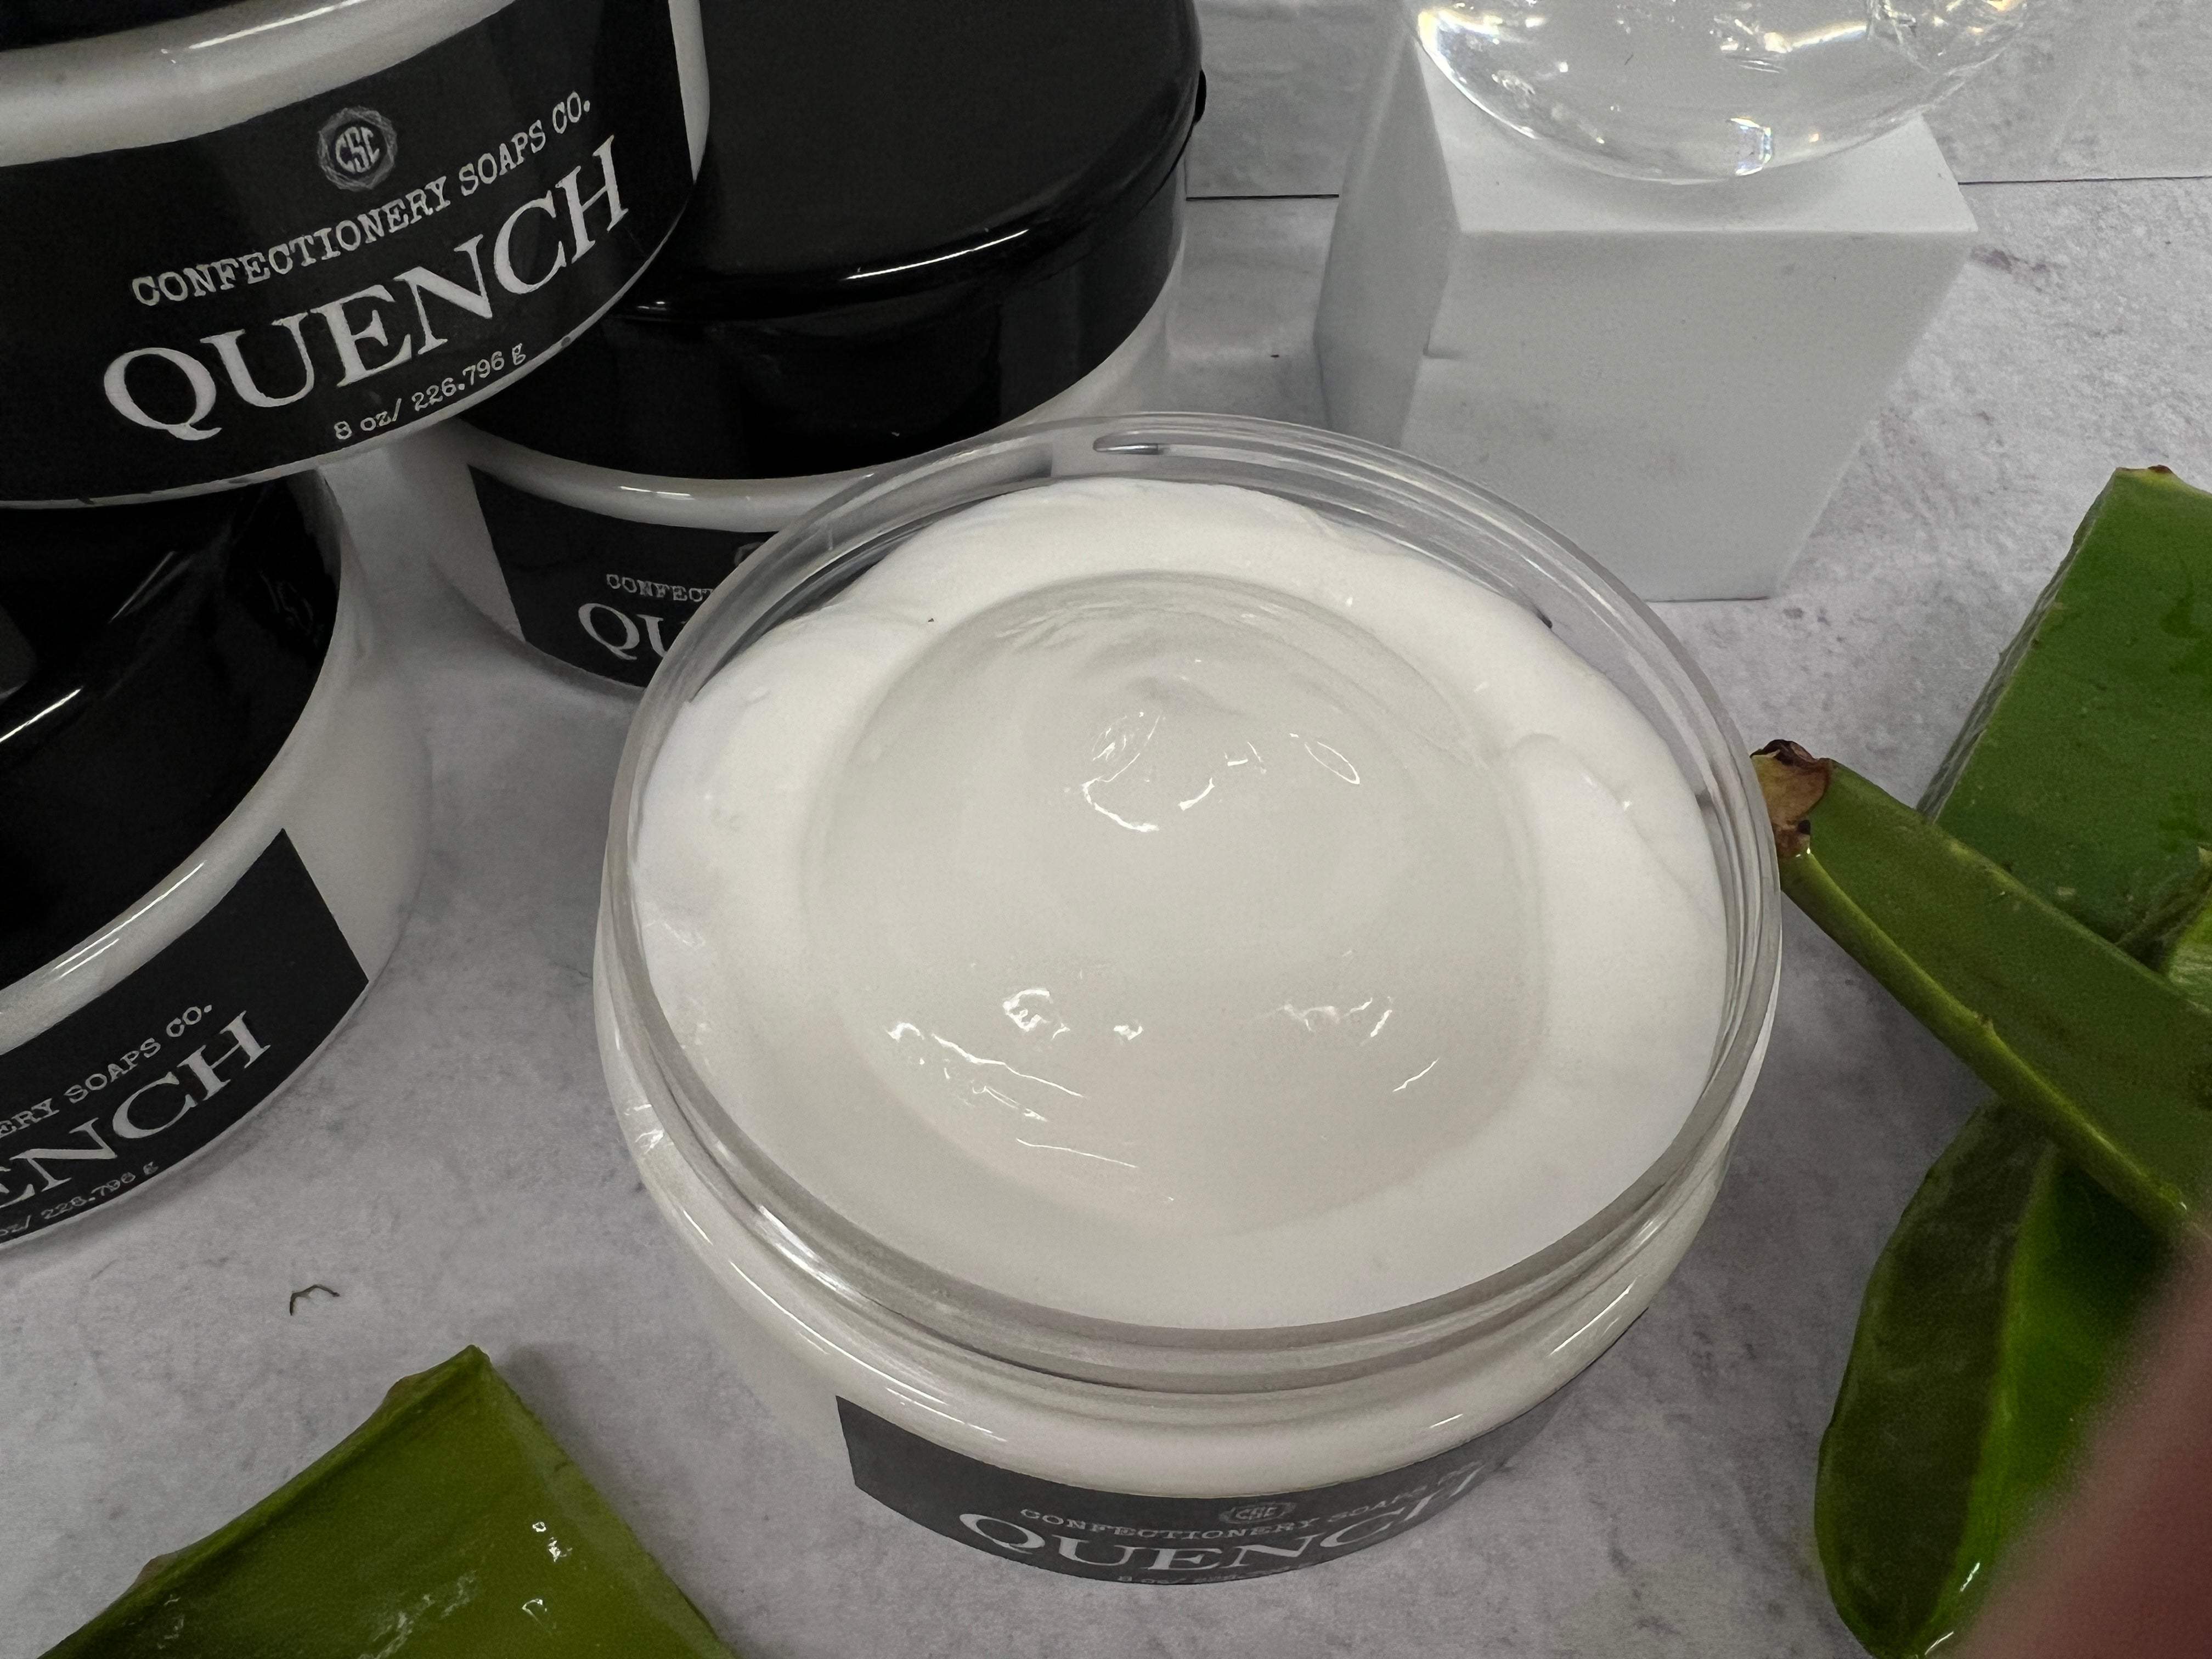 a zoomed in picture of the open quench jar, so you are able to see the aloe gel center surrounded by the lotion. stacked quench jars and aloe plant pieces are slightly visible as they are part of the listing's decorations.